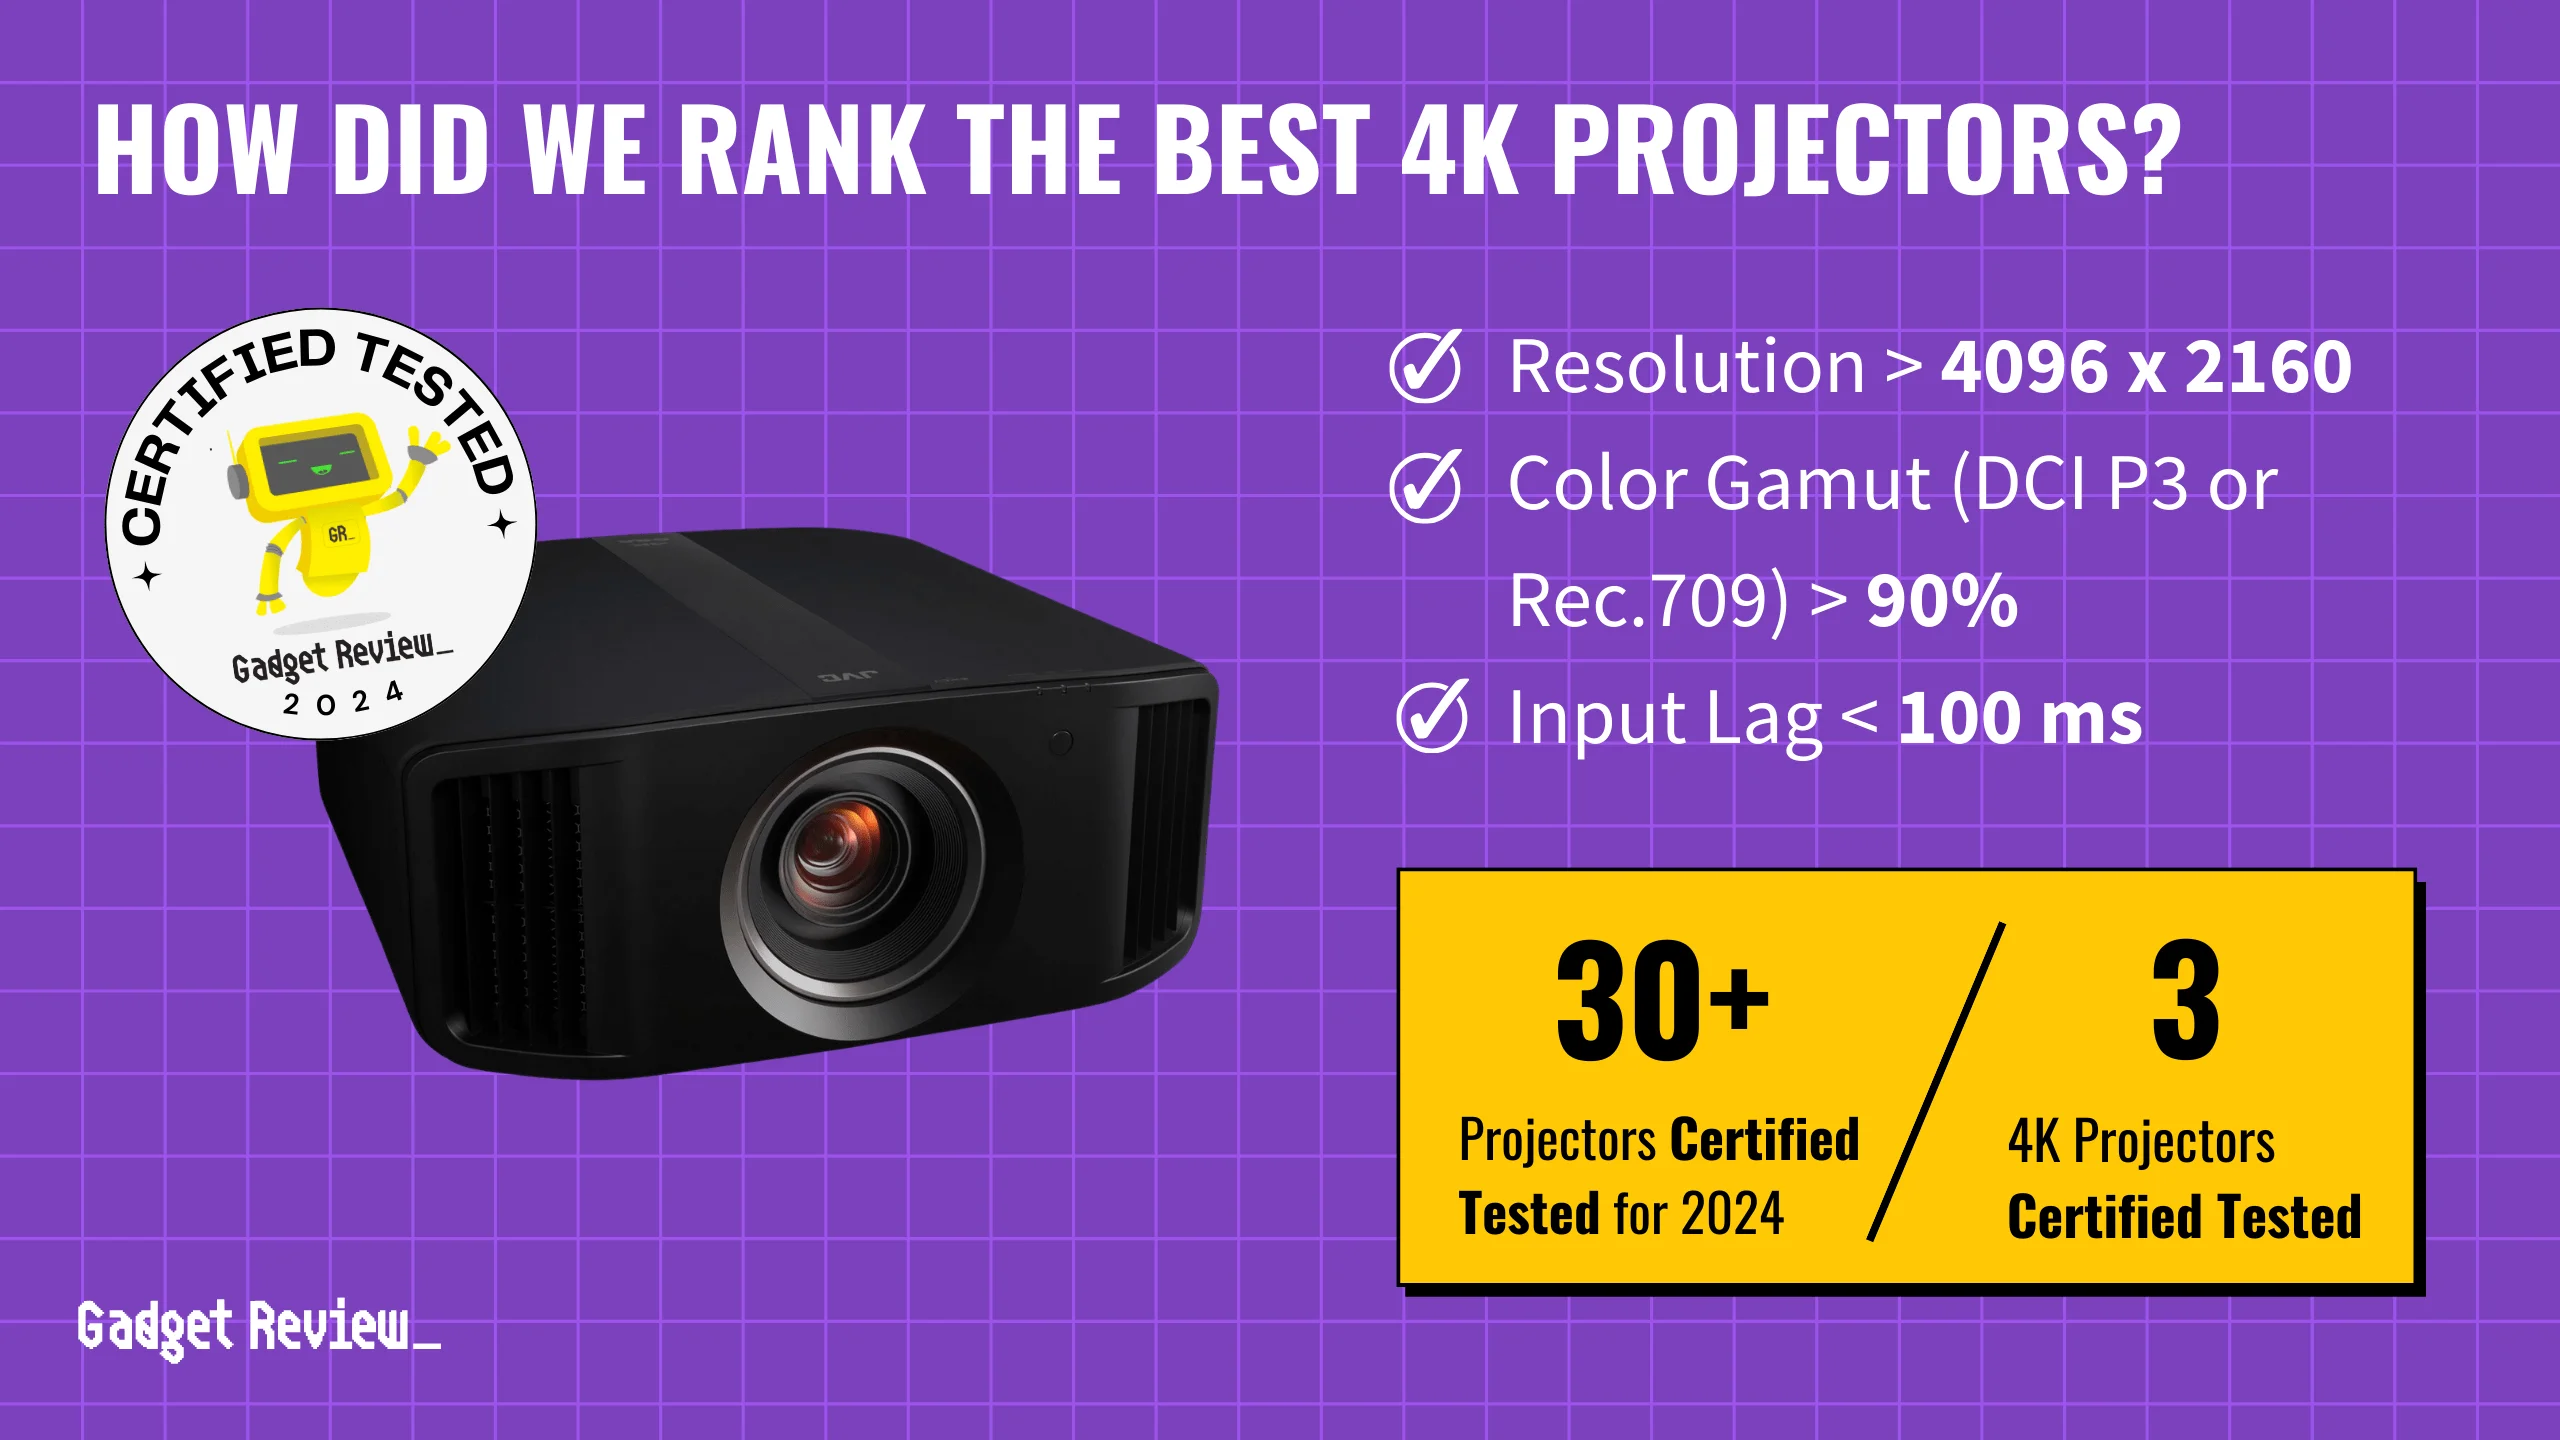 What are the 2 Best 4K Projectors?